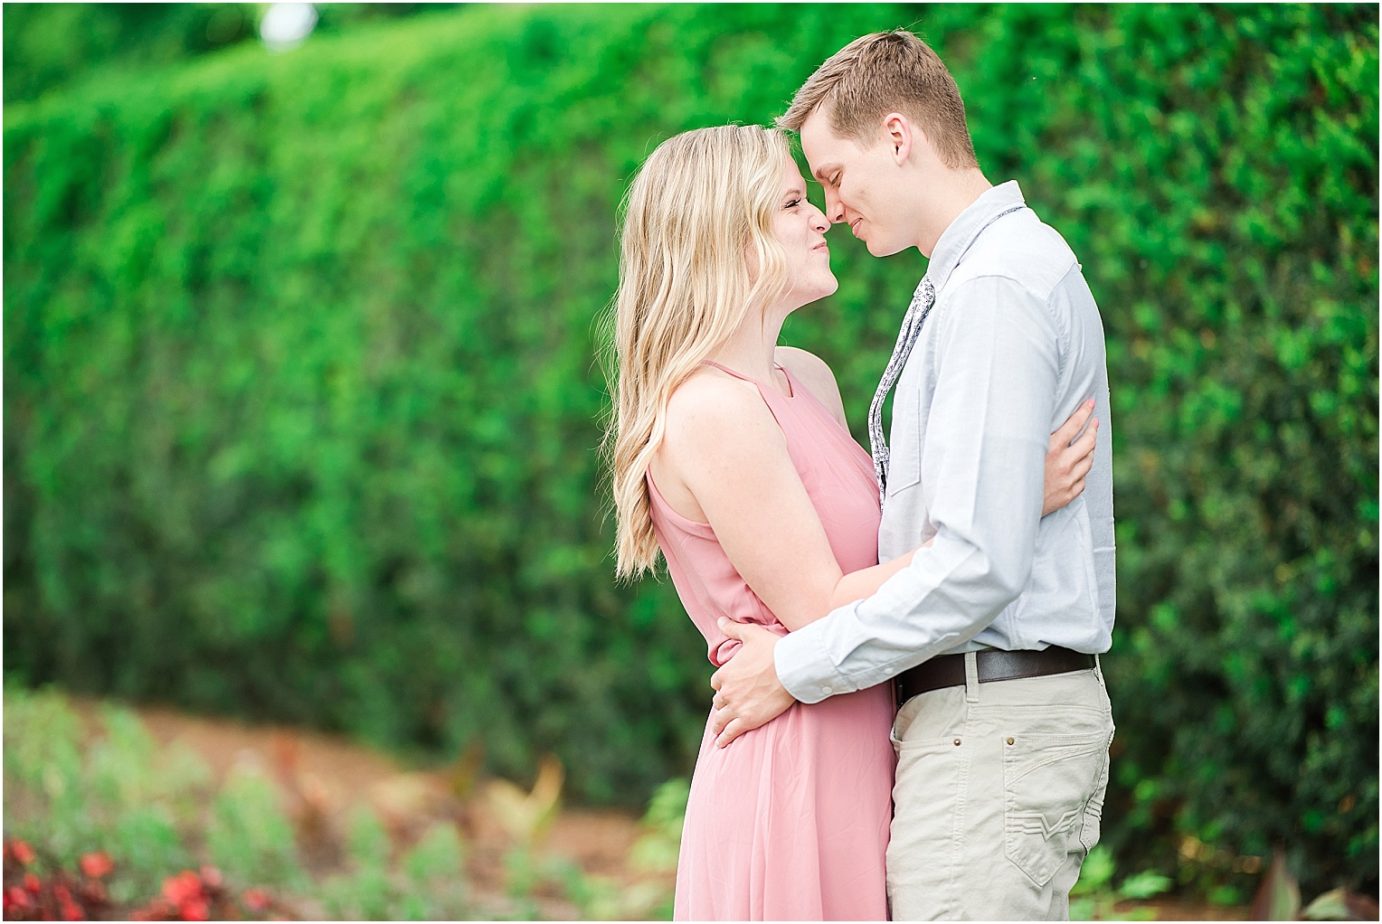 Manito Park Engagement Session Spokane Photographer Bryan and Olivia in Duncan Garden